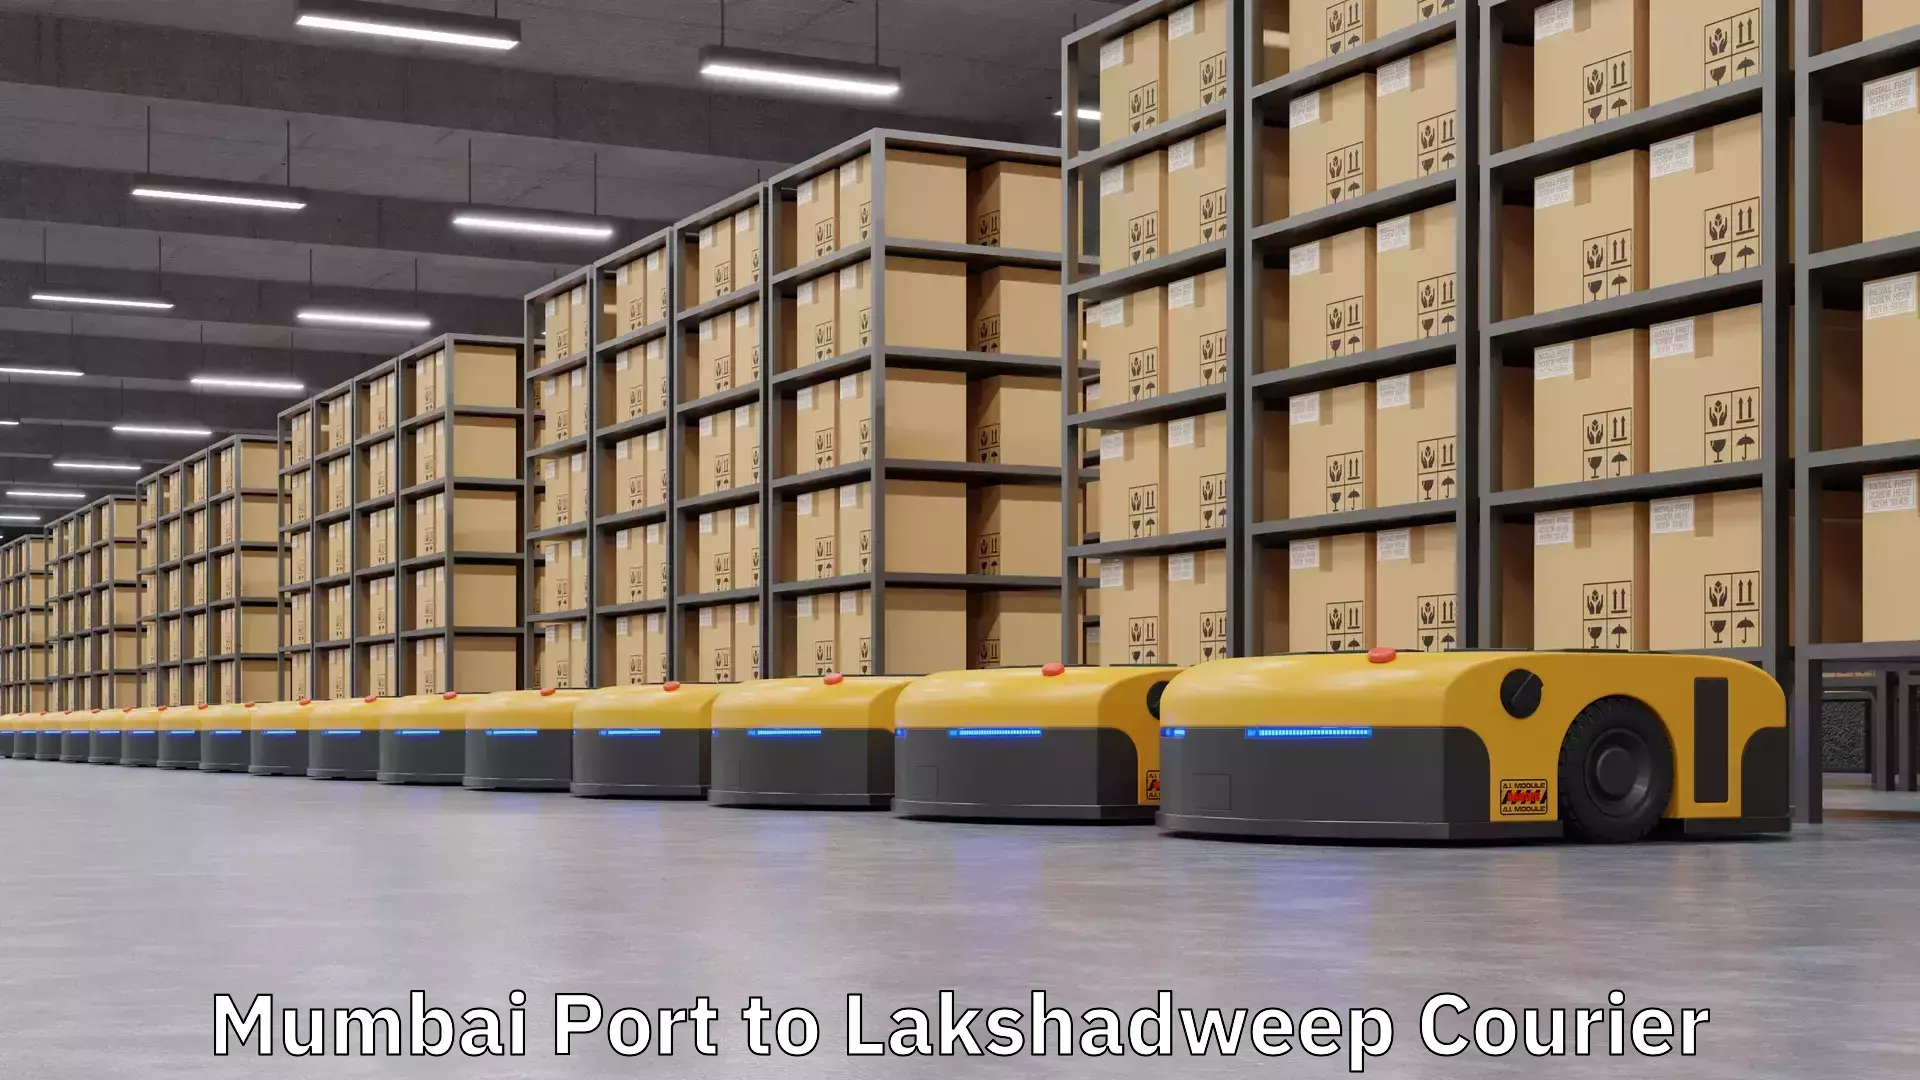 Next-day freight services in Mumbai Port to Lakshadweep